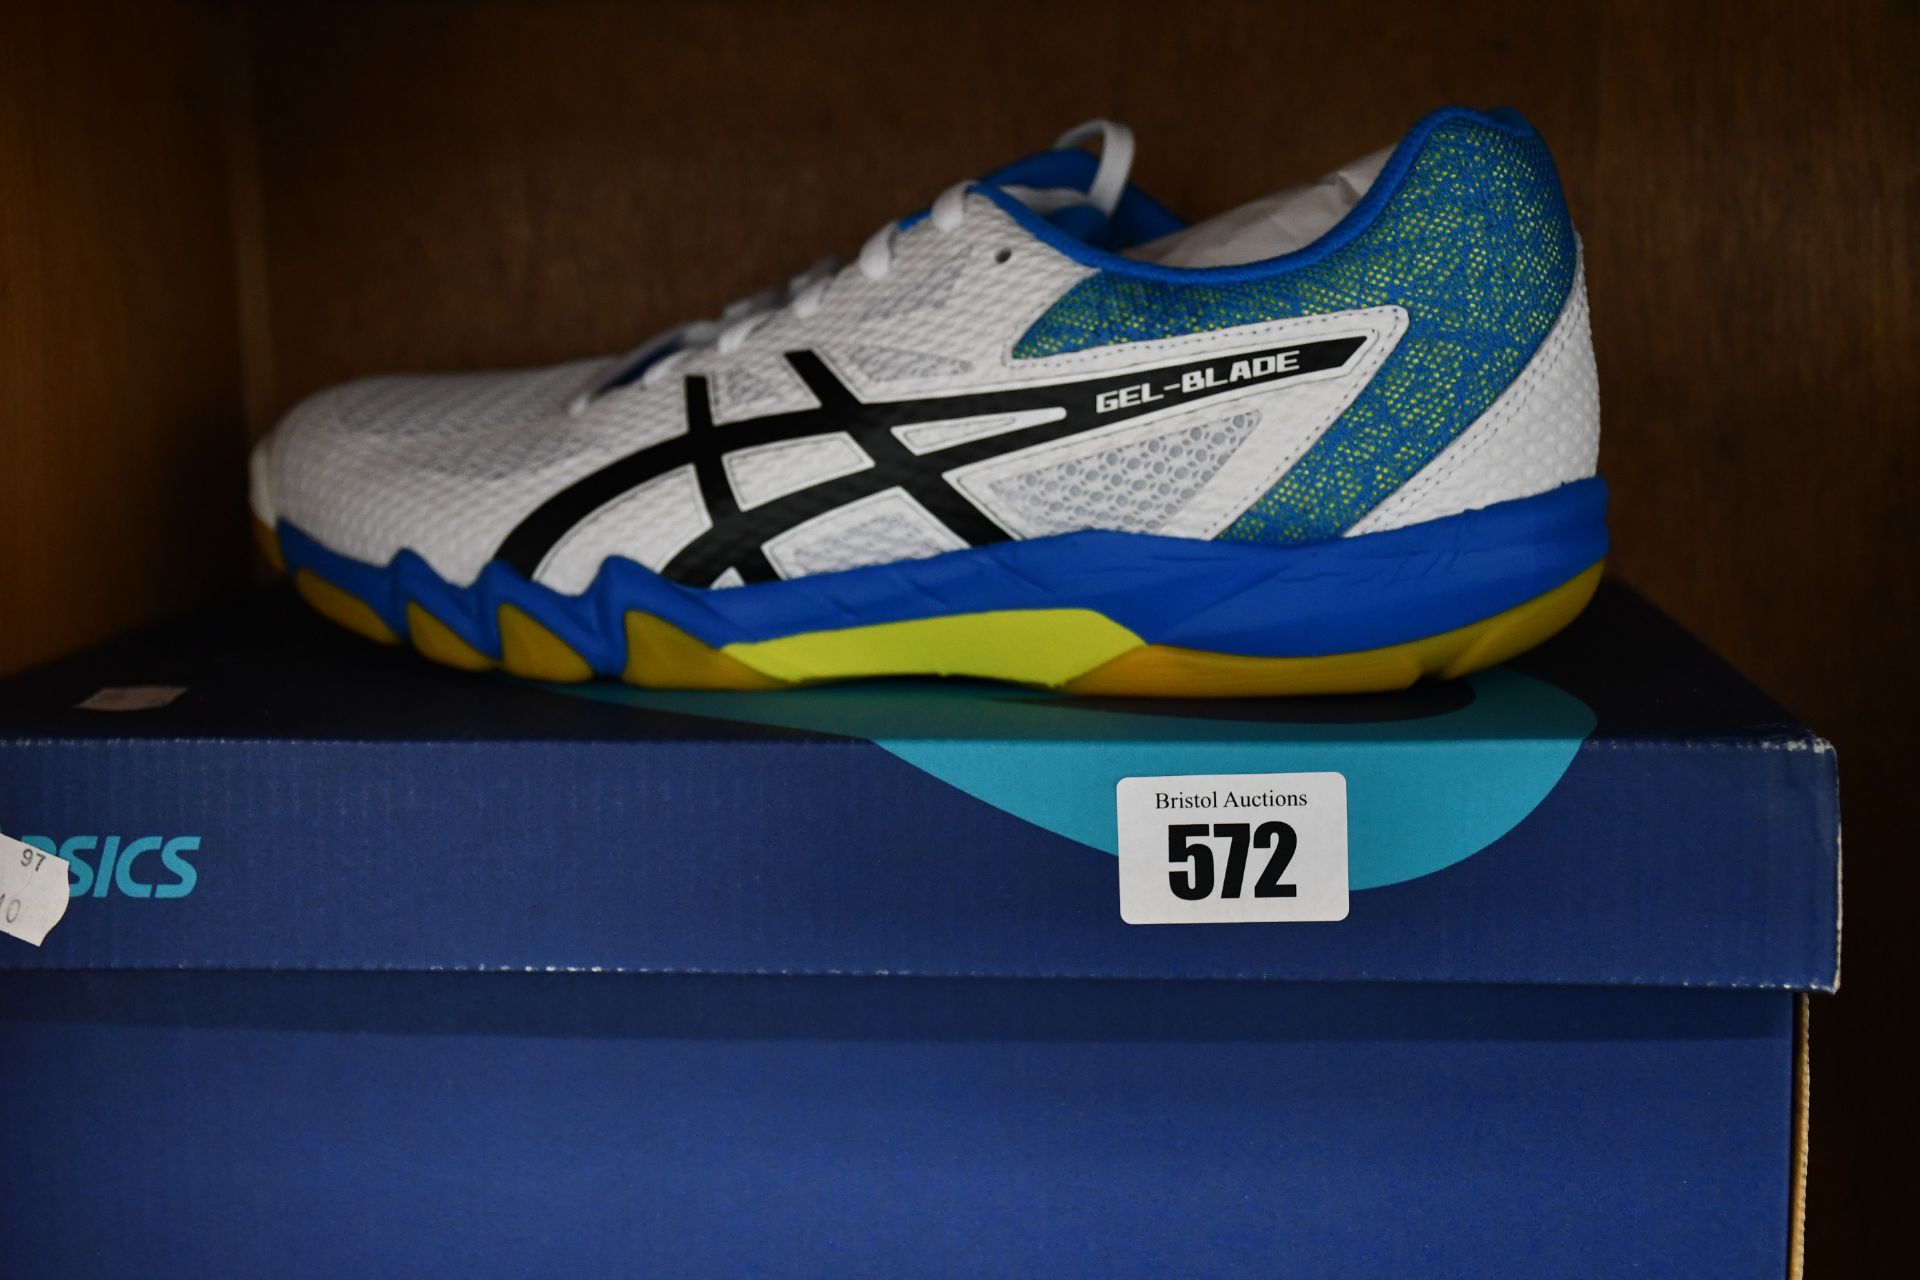 Two pairs of men's as new Asics Gel-Blade 7 trainers (UK 8 and 8.5).